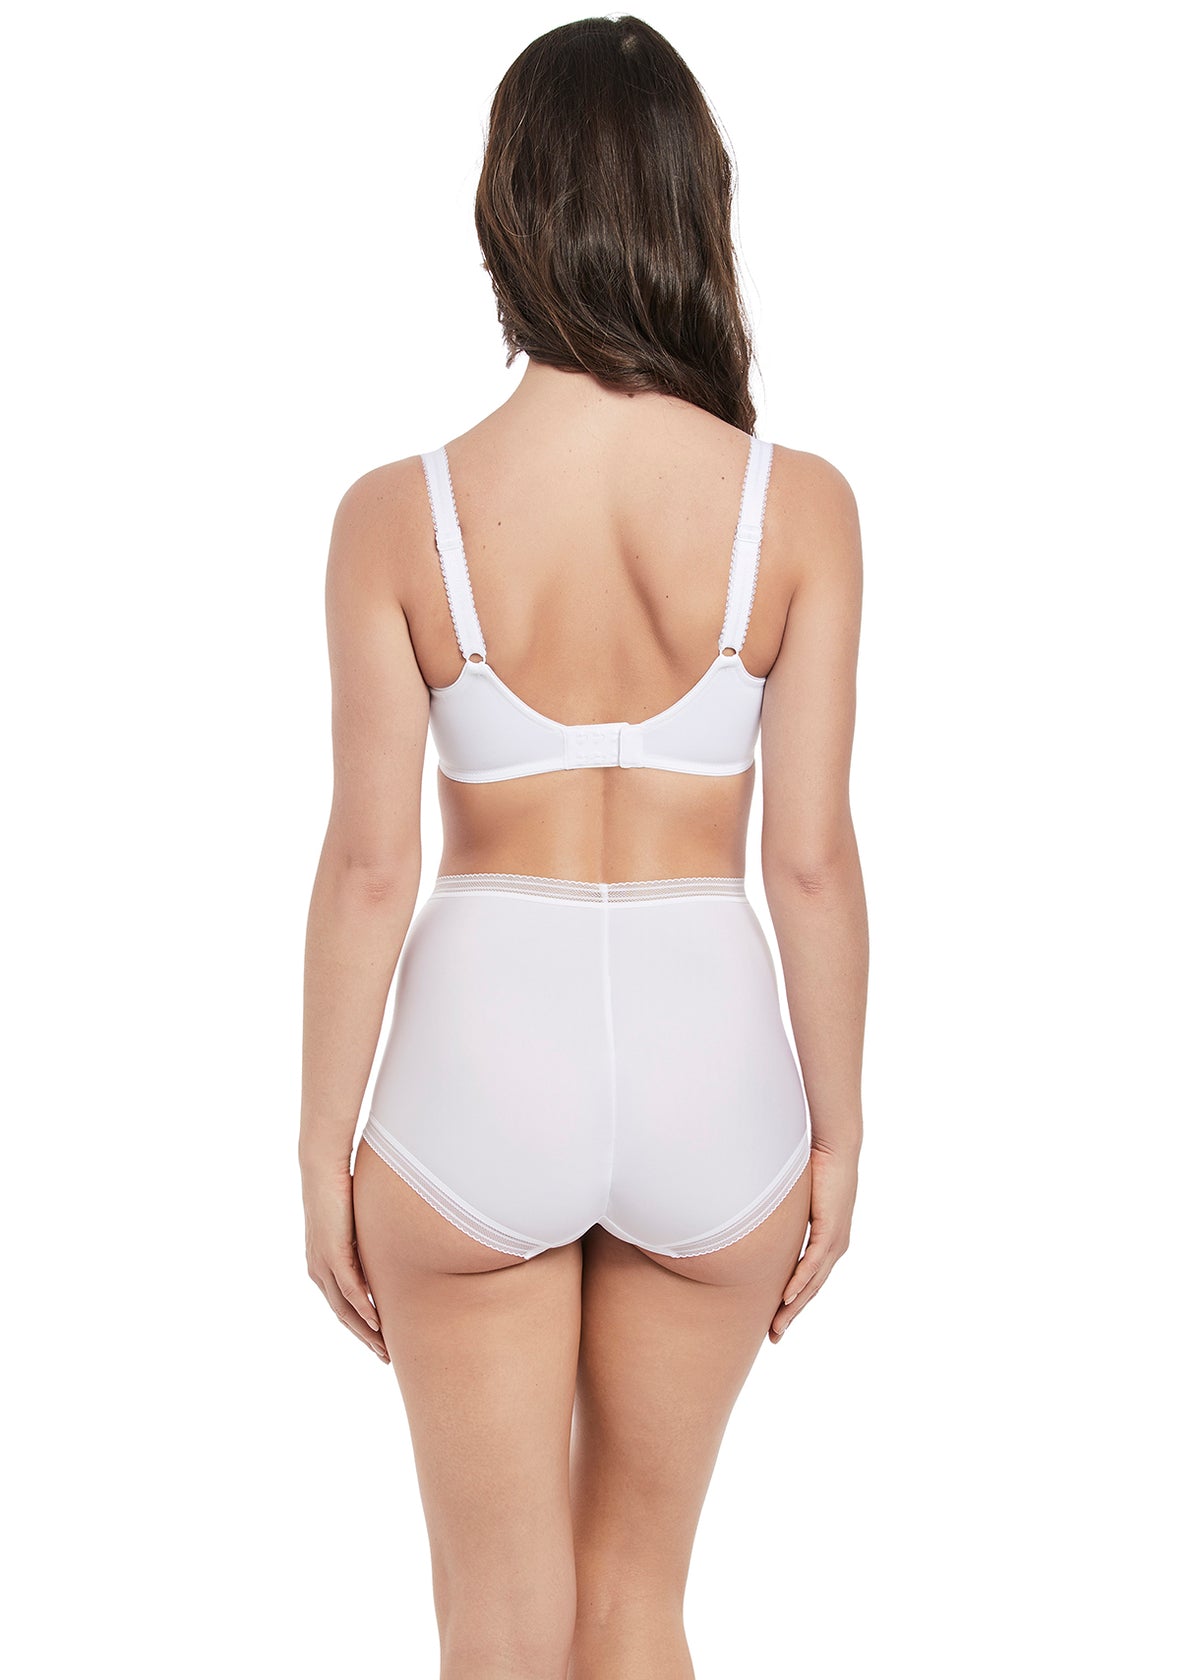 Target Fuller Figure Firm Support Wirefree Bra - White